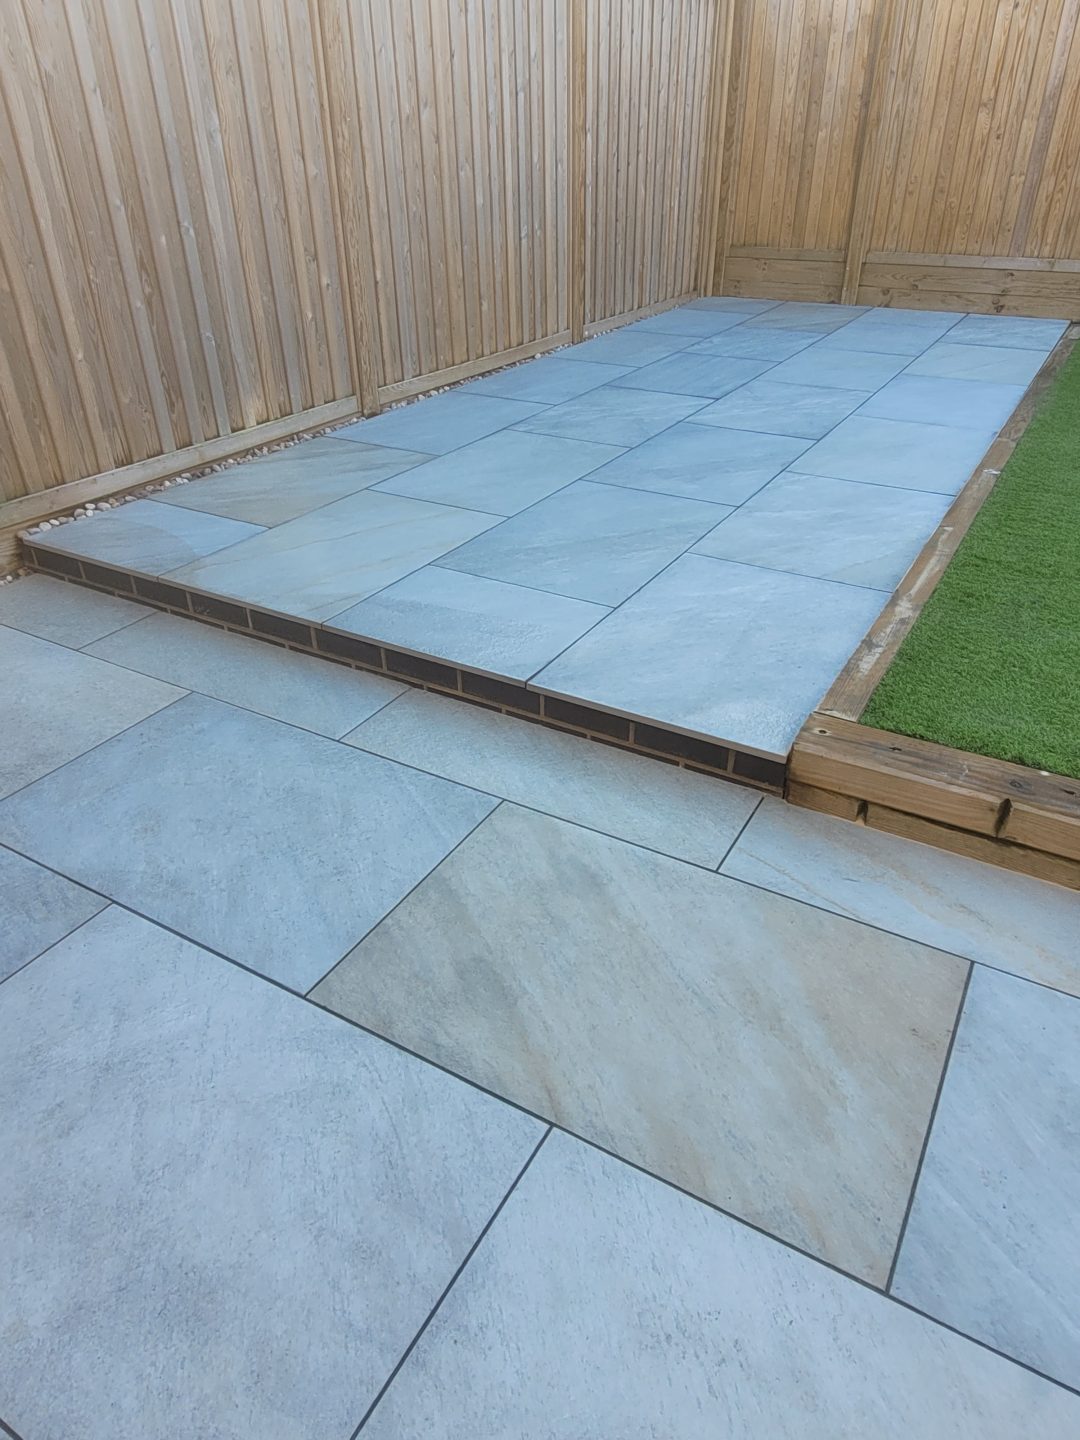 Grey porcelain tile patio with slimline aco drains and reduced steps in Midsomer Norton.